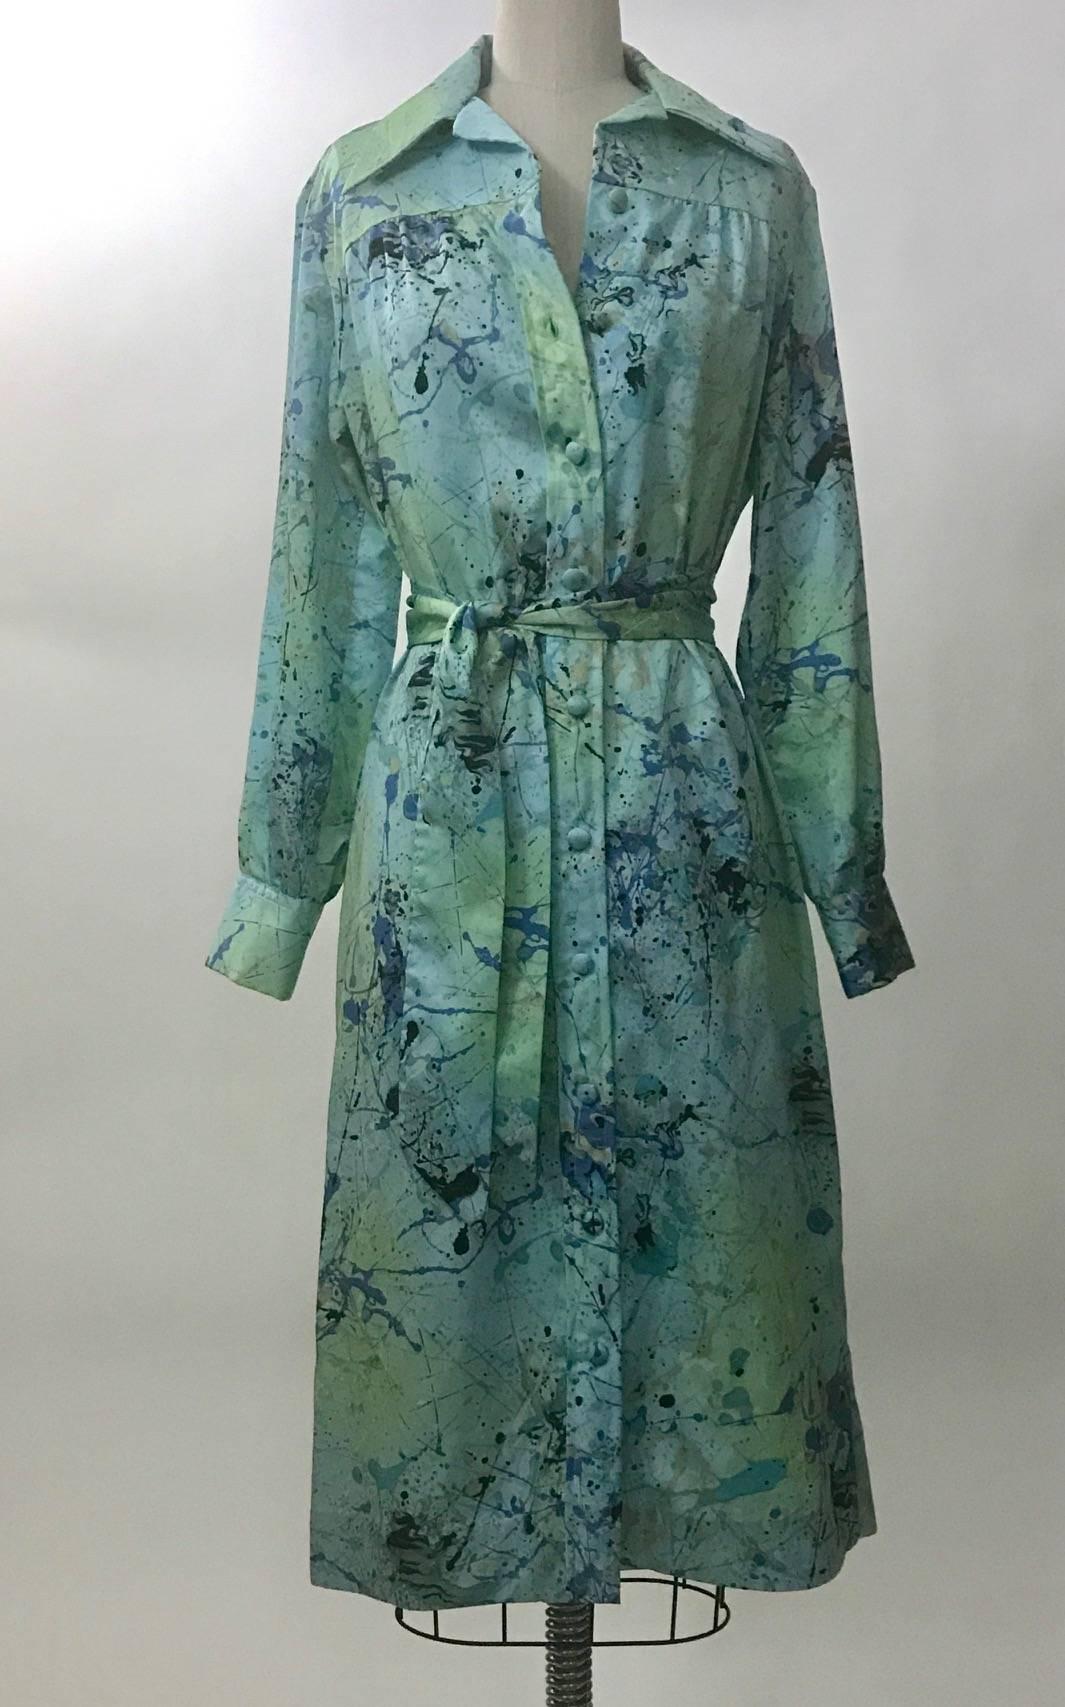 Vintage 1960s Lanvin wide collared shirtdress in robin's egg light blue with a blue and pale mint green splatter paint design slightly reminiscent of Jackson Pollock. Button front, removable belt, buttons at cuffs. 

Content label faded, likely